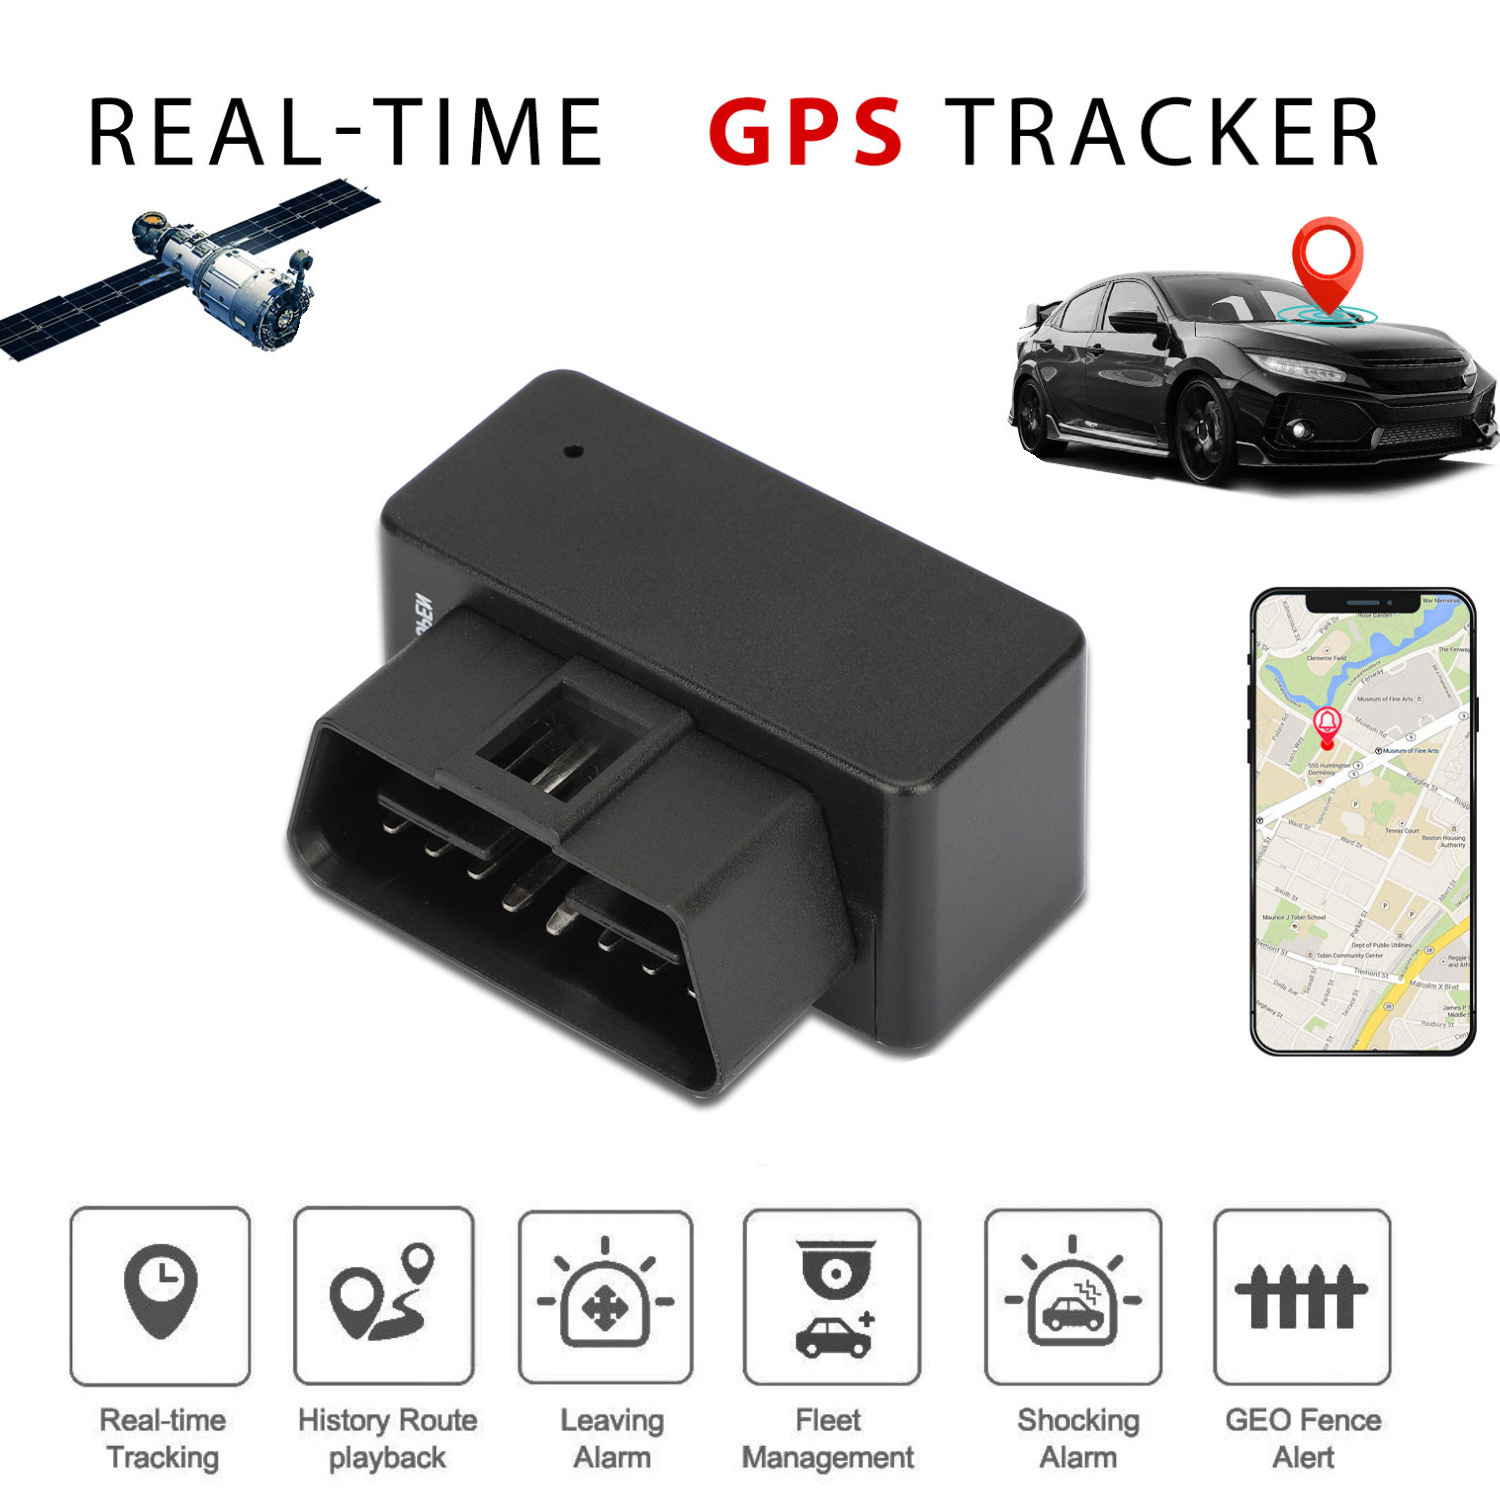 New Launched 2G OBDII Vehicle Locator Car GPS Tracker with Power Saving Mode for Automotive Safety Tracking T207